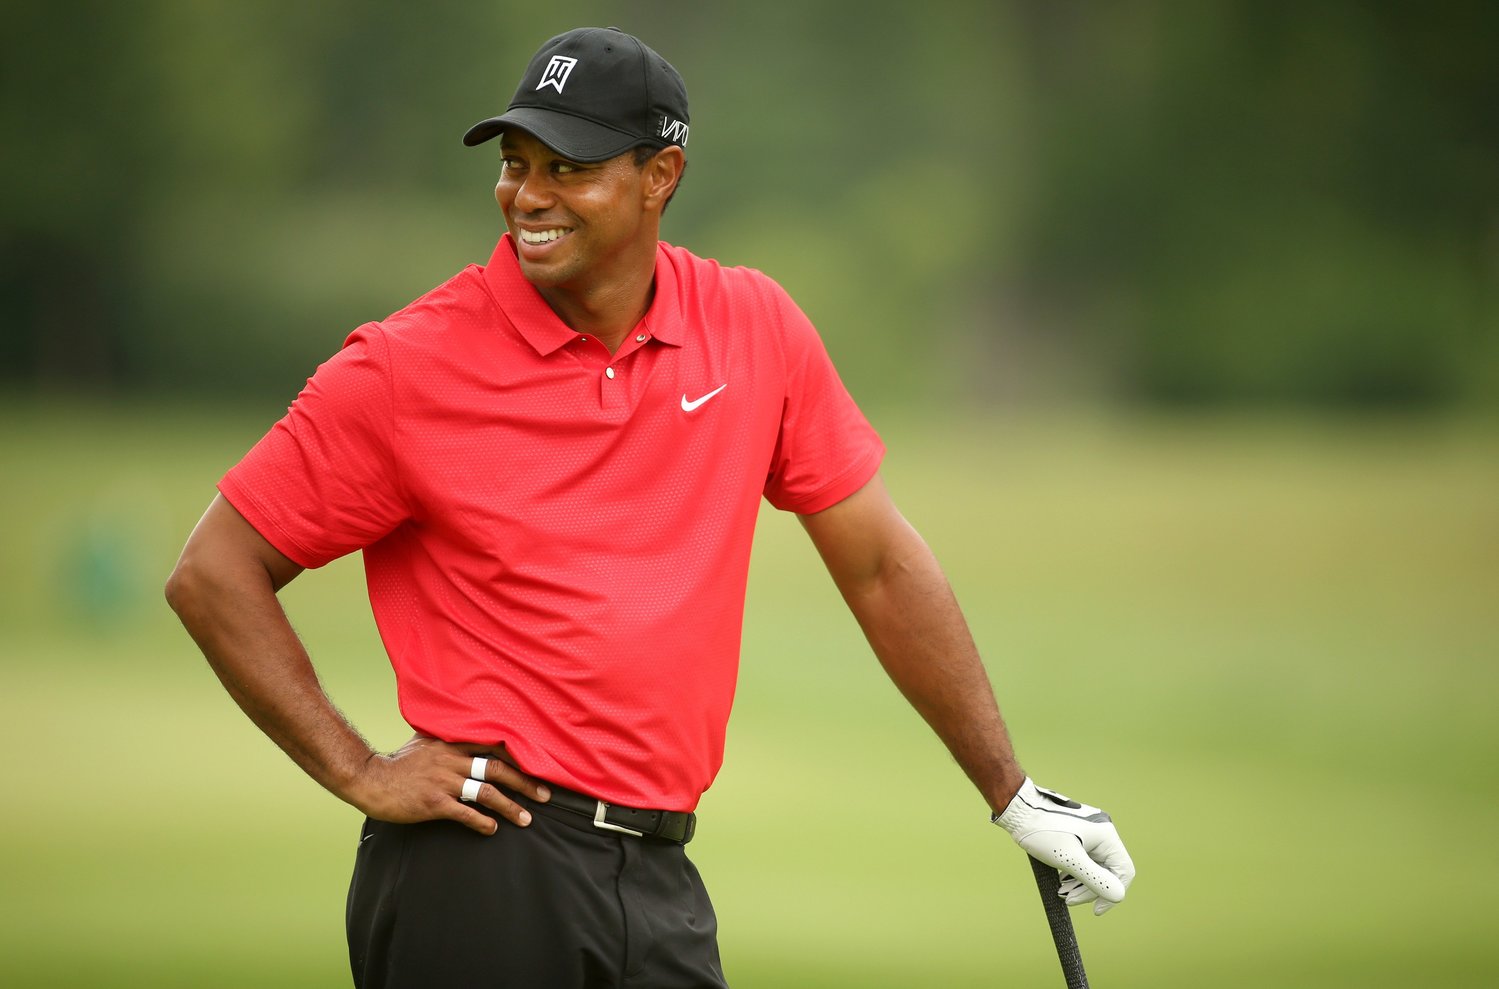 Tiger Woods was spotted in Oklahoma for a practice round at Southern Hills ahead of the PGA Championship in May.